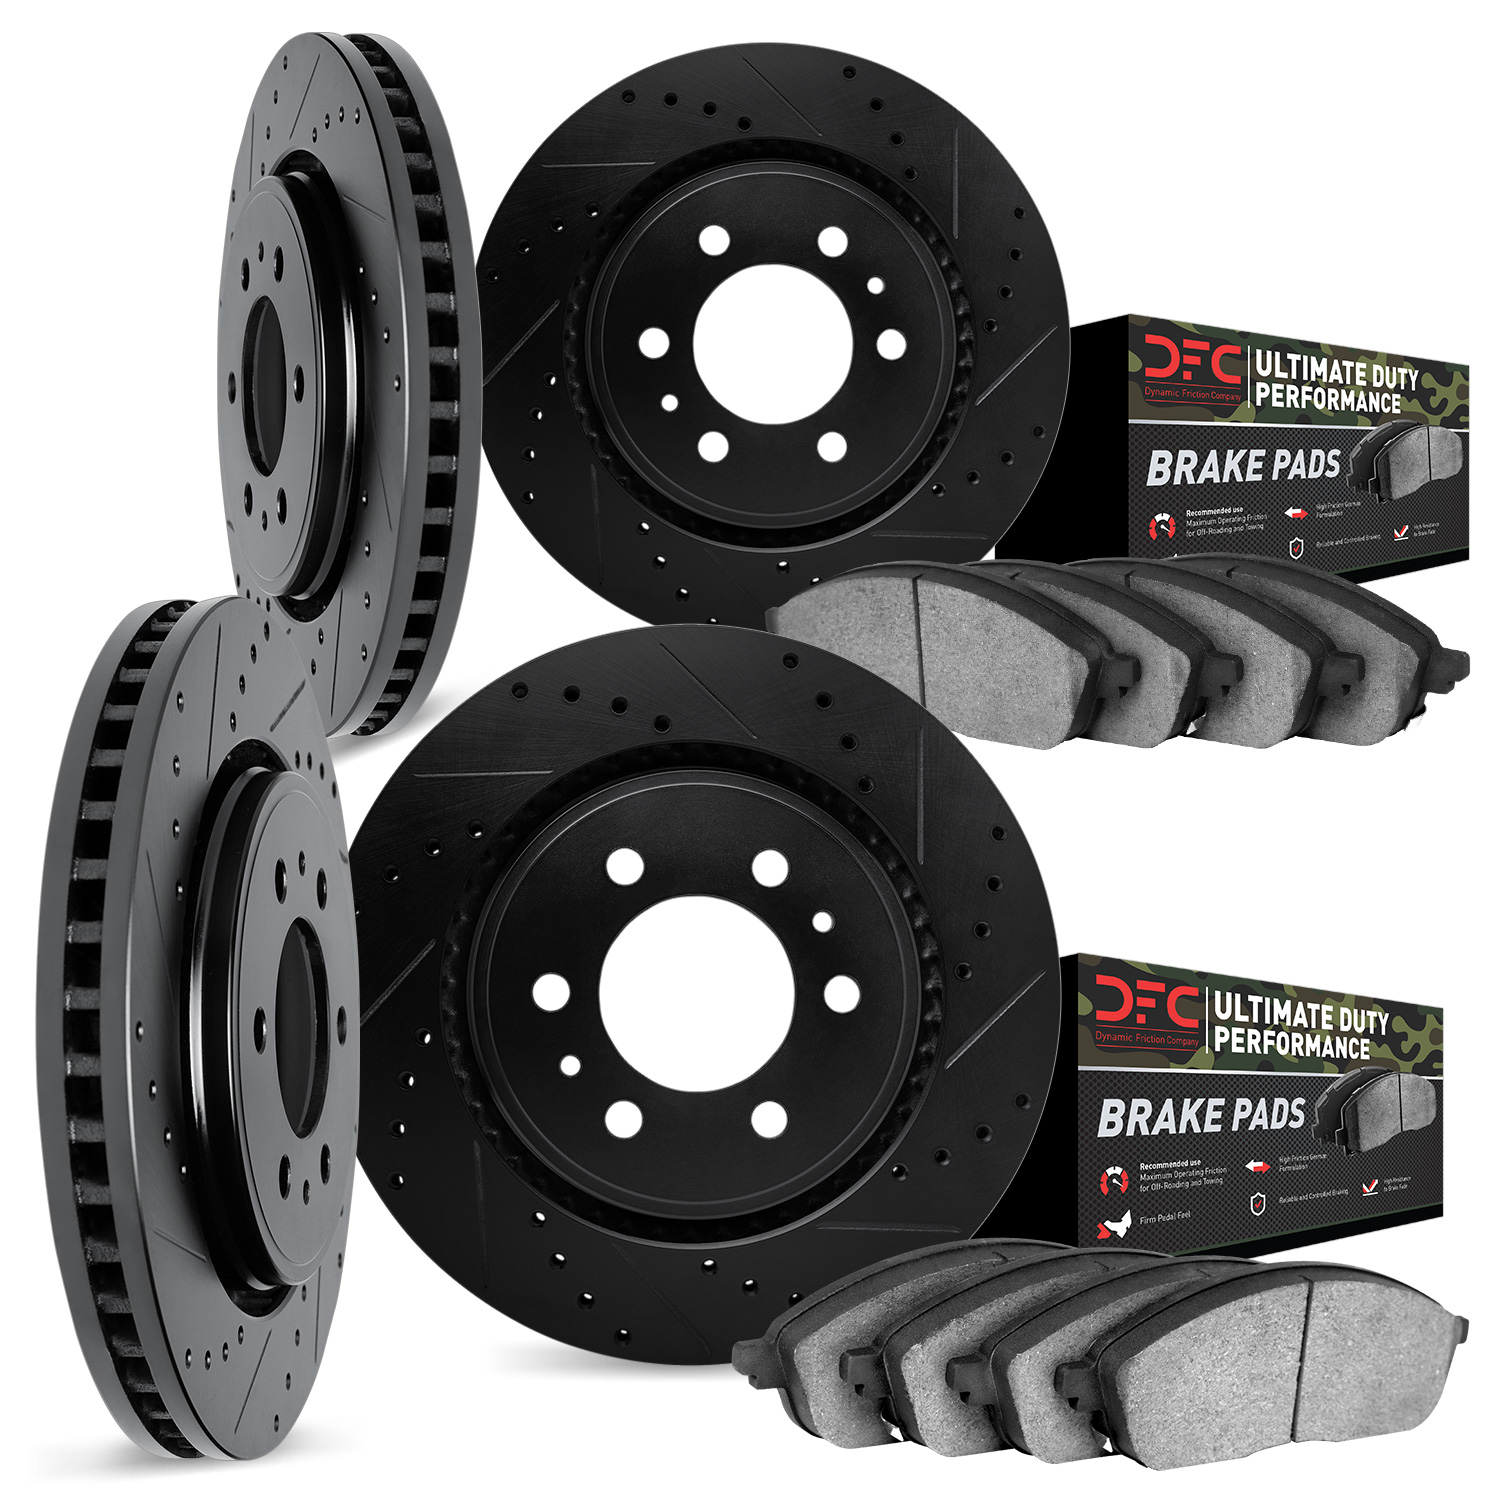 8404-76002 Drilled/Slotted Brake Rotors with Ultimate-Duty Brake Pads Kit [Black], 2001-2007 Lexus/Toyota/Scion, Position: Front